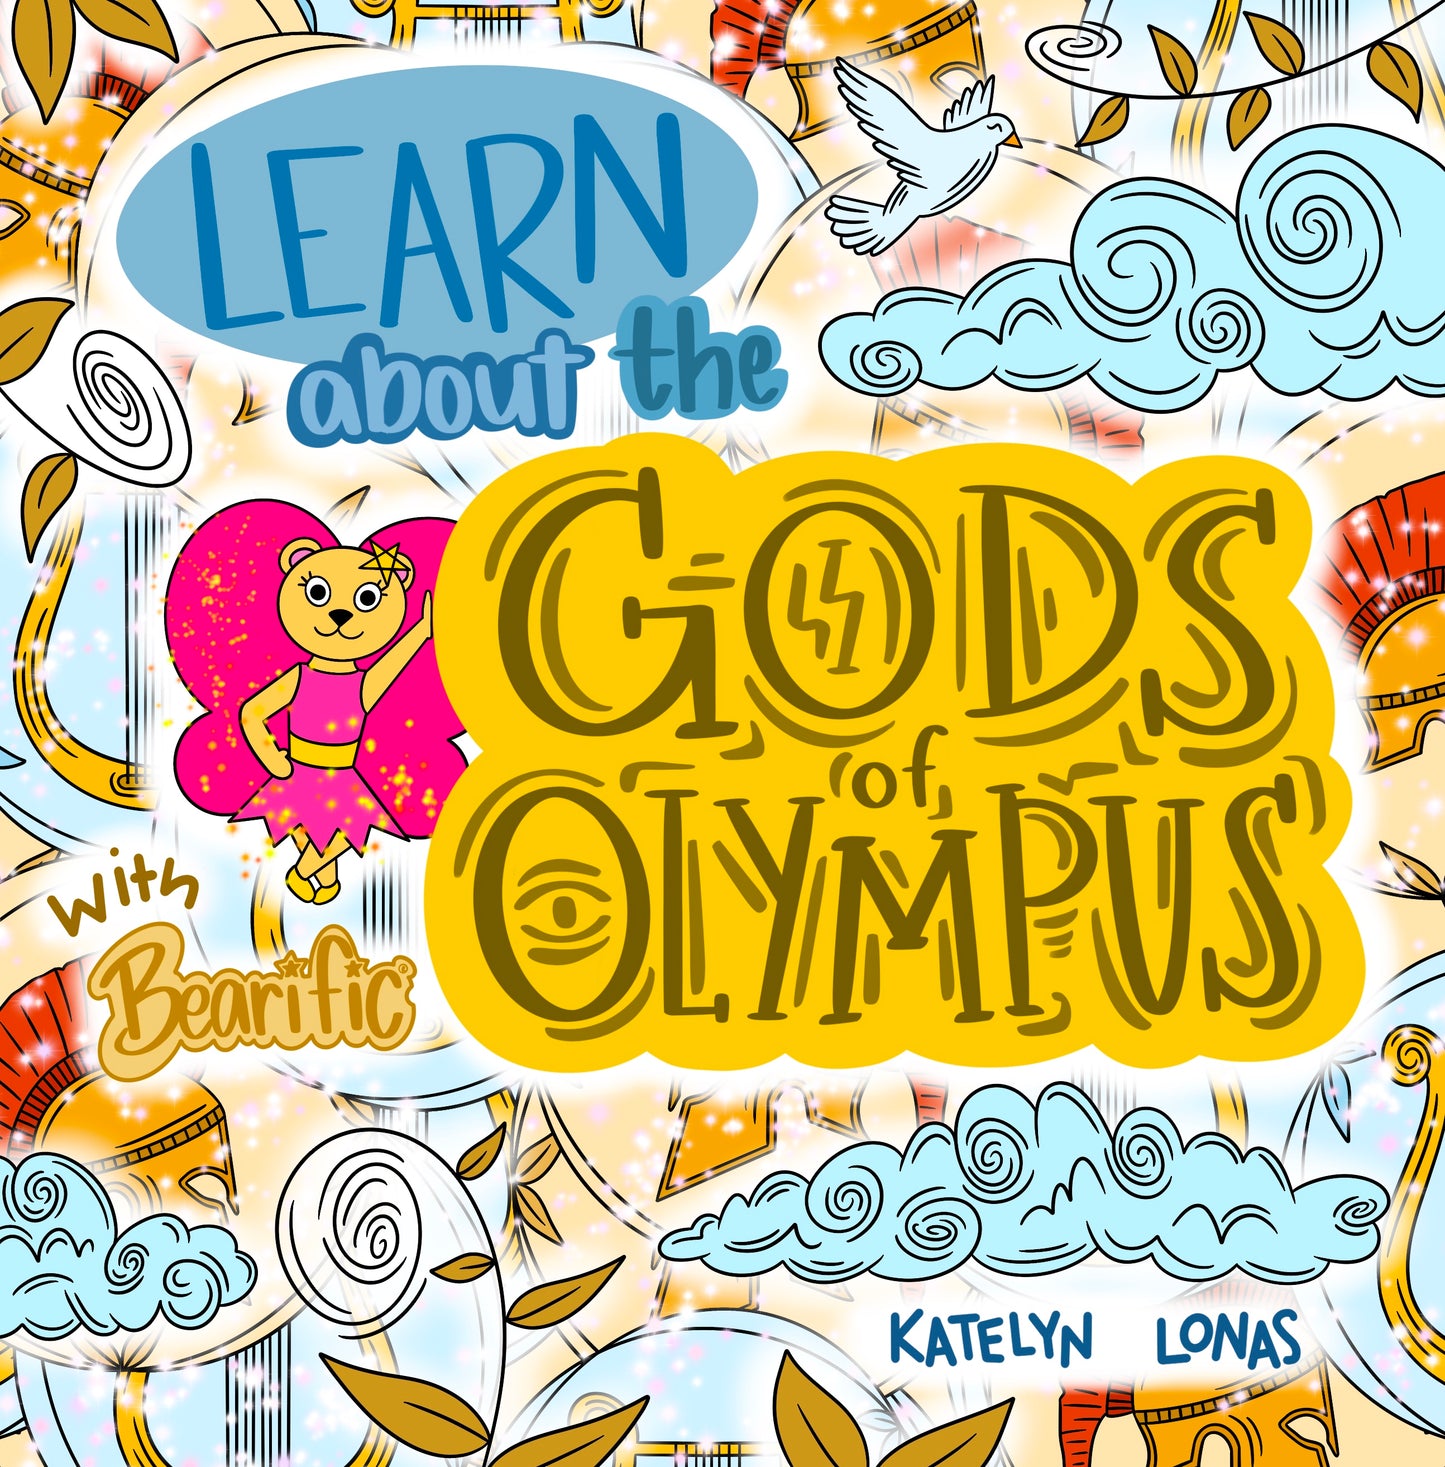 Learn about the Gods of Olympus with Bearific